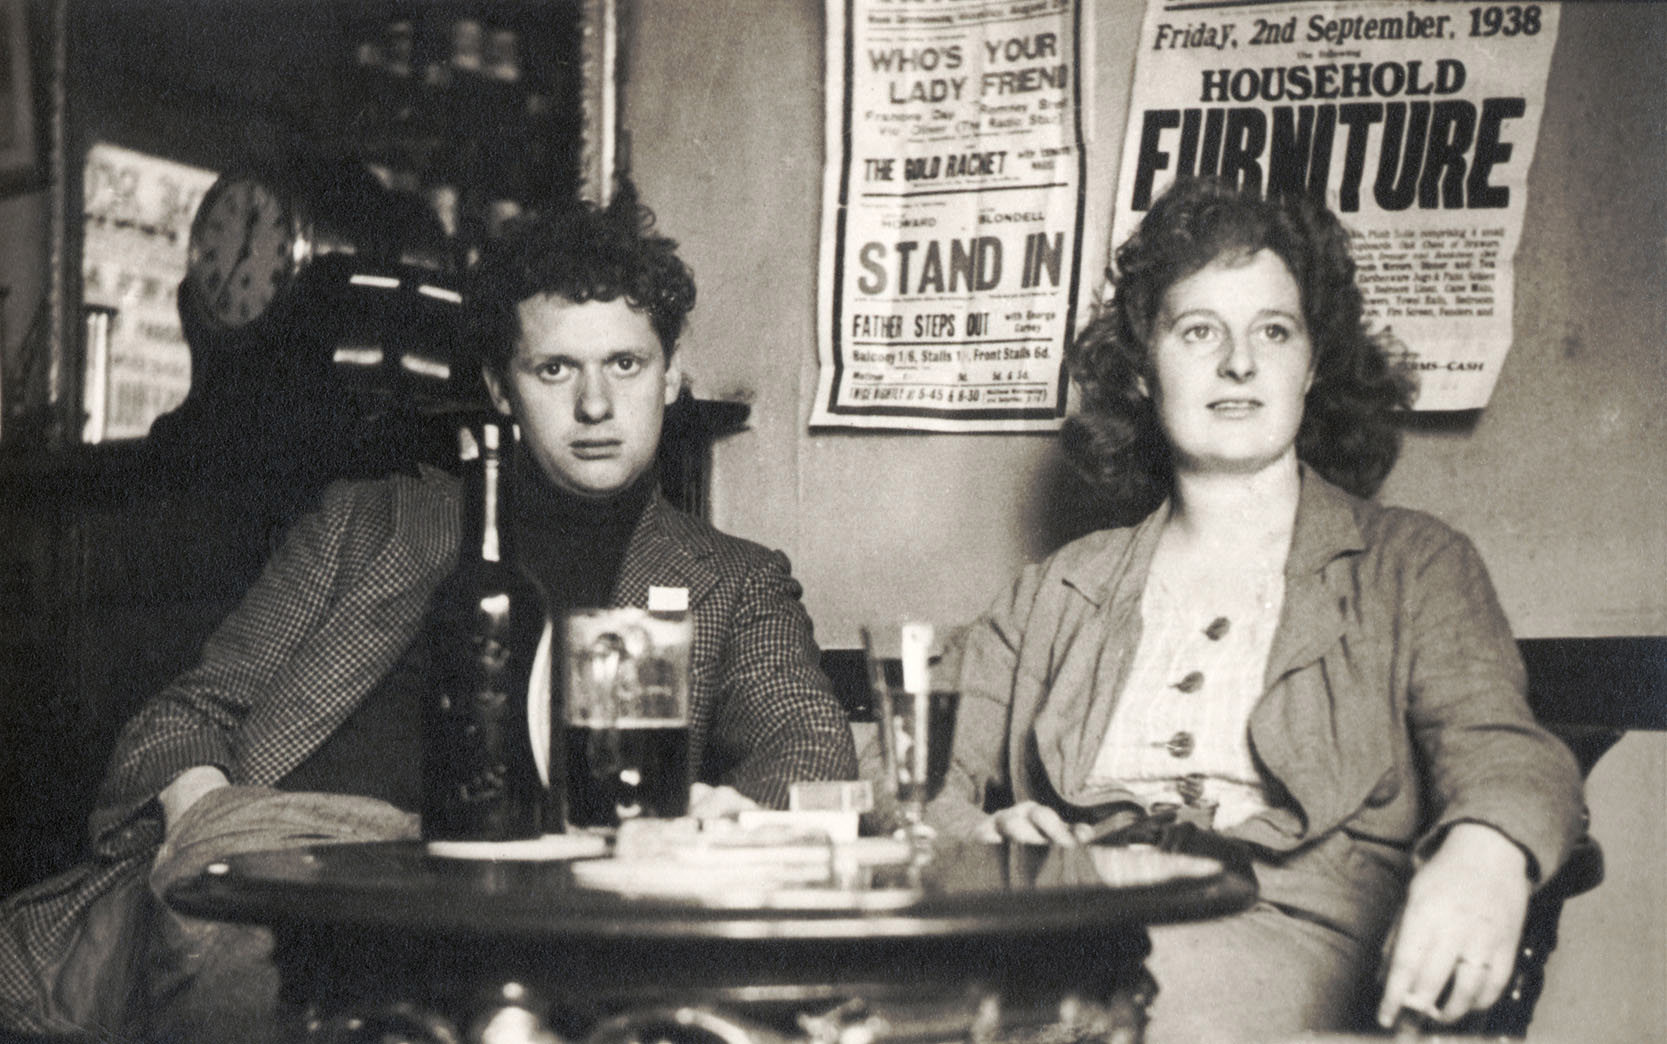 Dylan Thomas - portrait of Welsh poet with wife Caitlin Thomas. 1914-1953